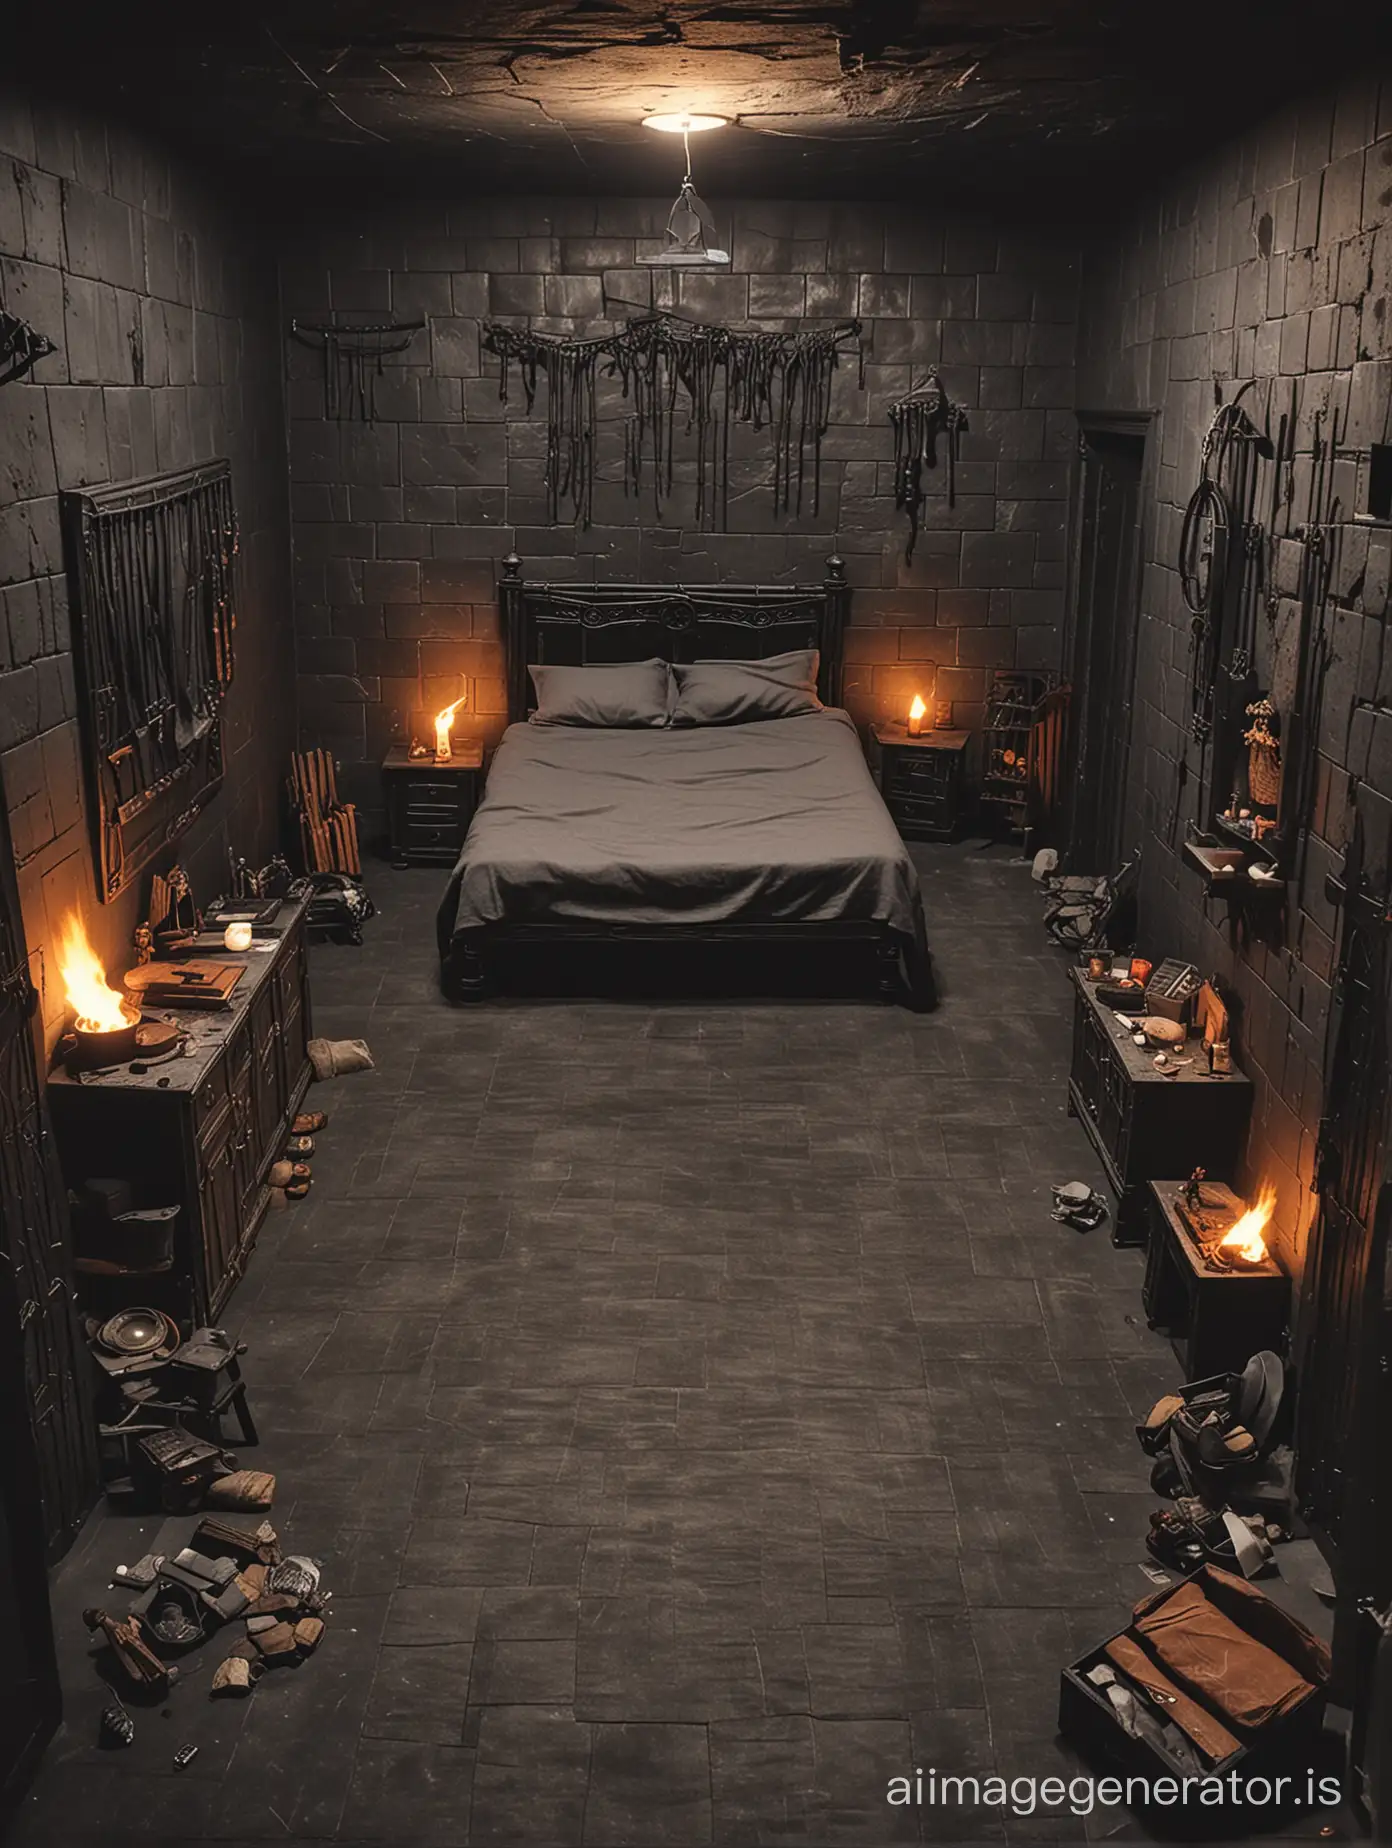 DnD style bedroom with everything burnt black. Bed burned, chest burned. There is a DnD type wraith in the room. Underground dungeon themed